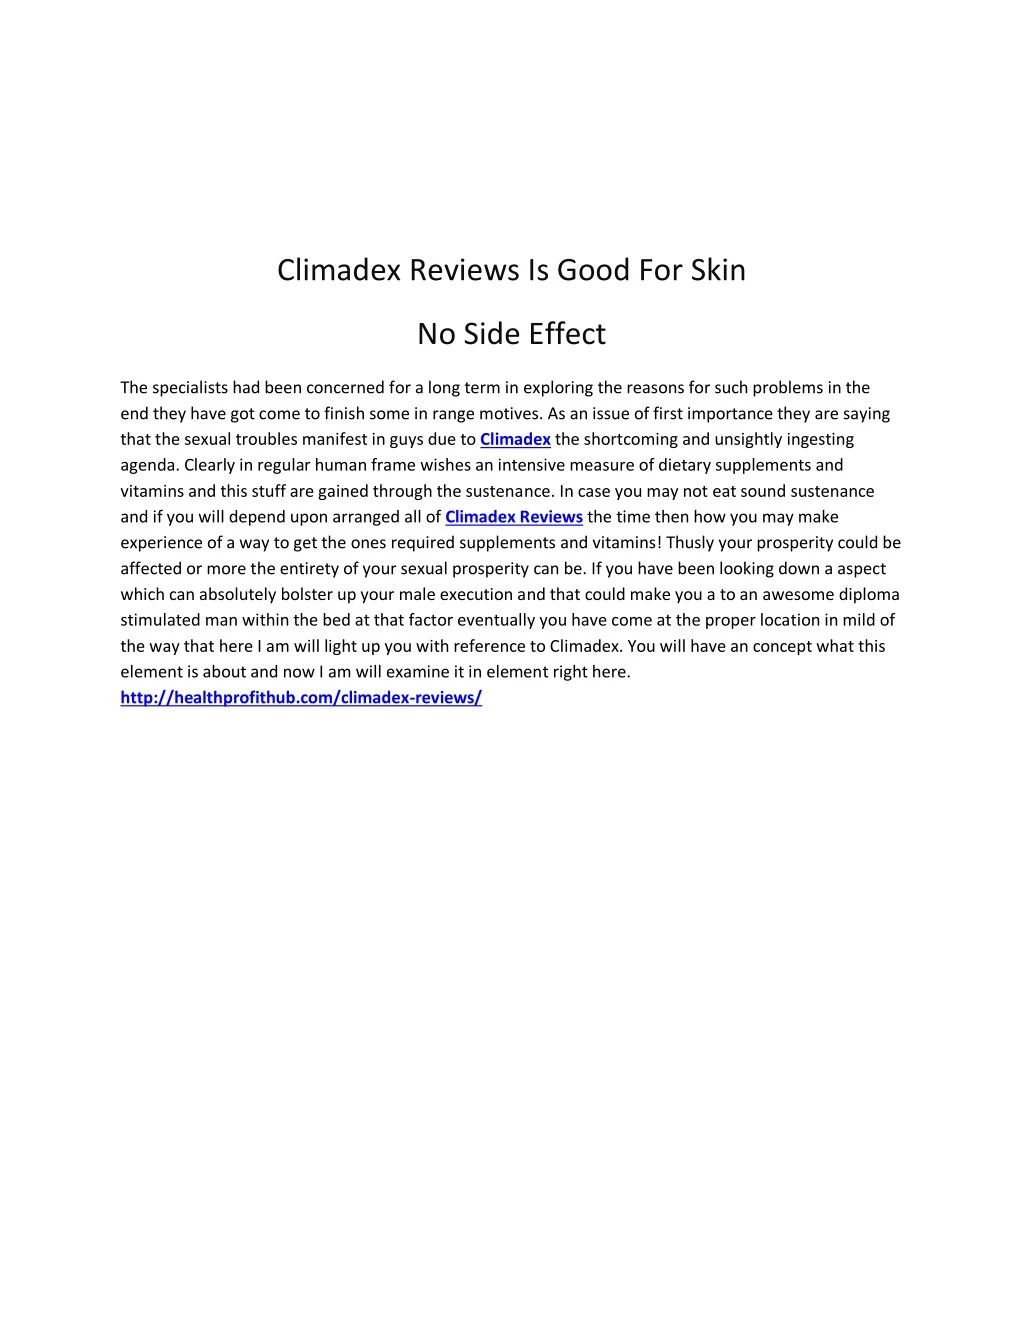 climadex reviews is good for skin